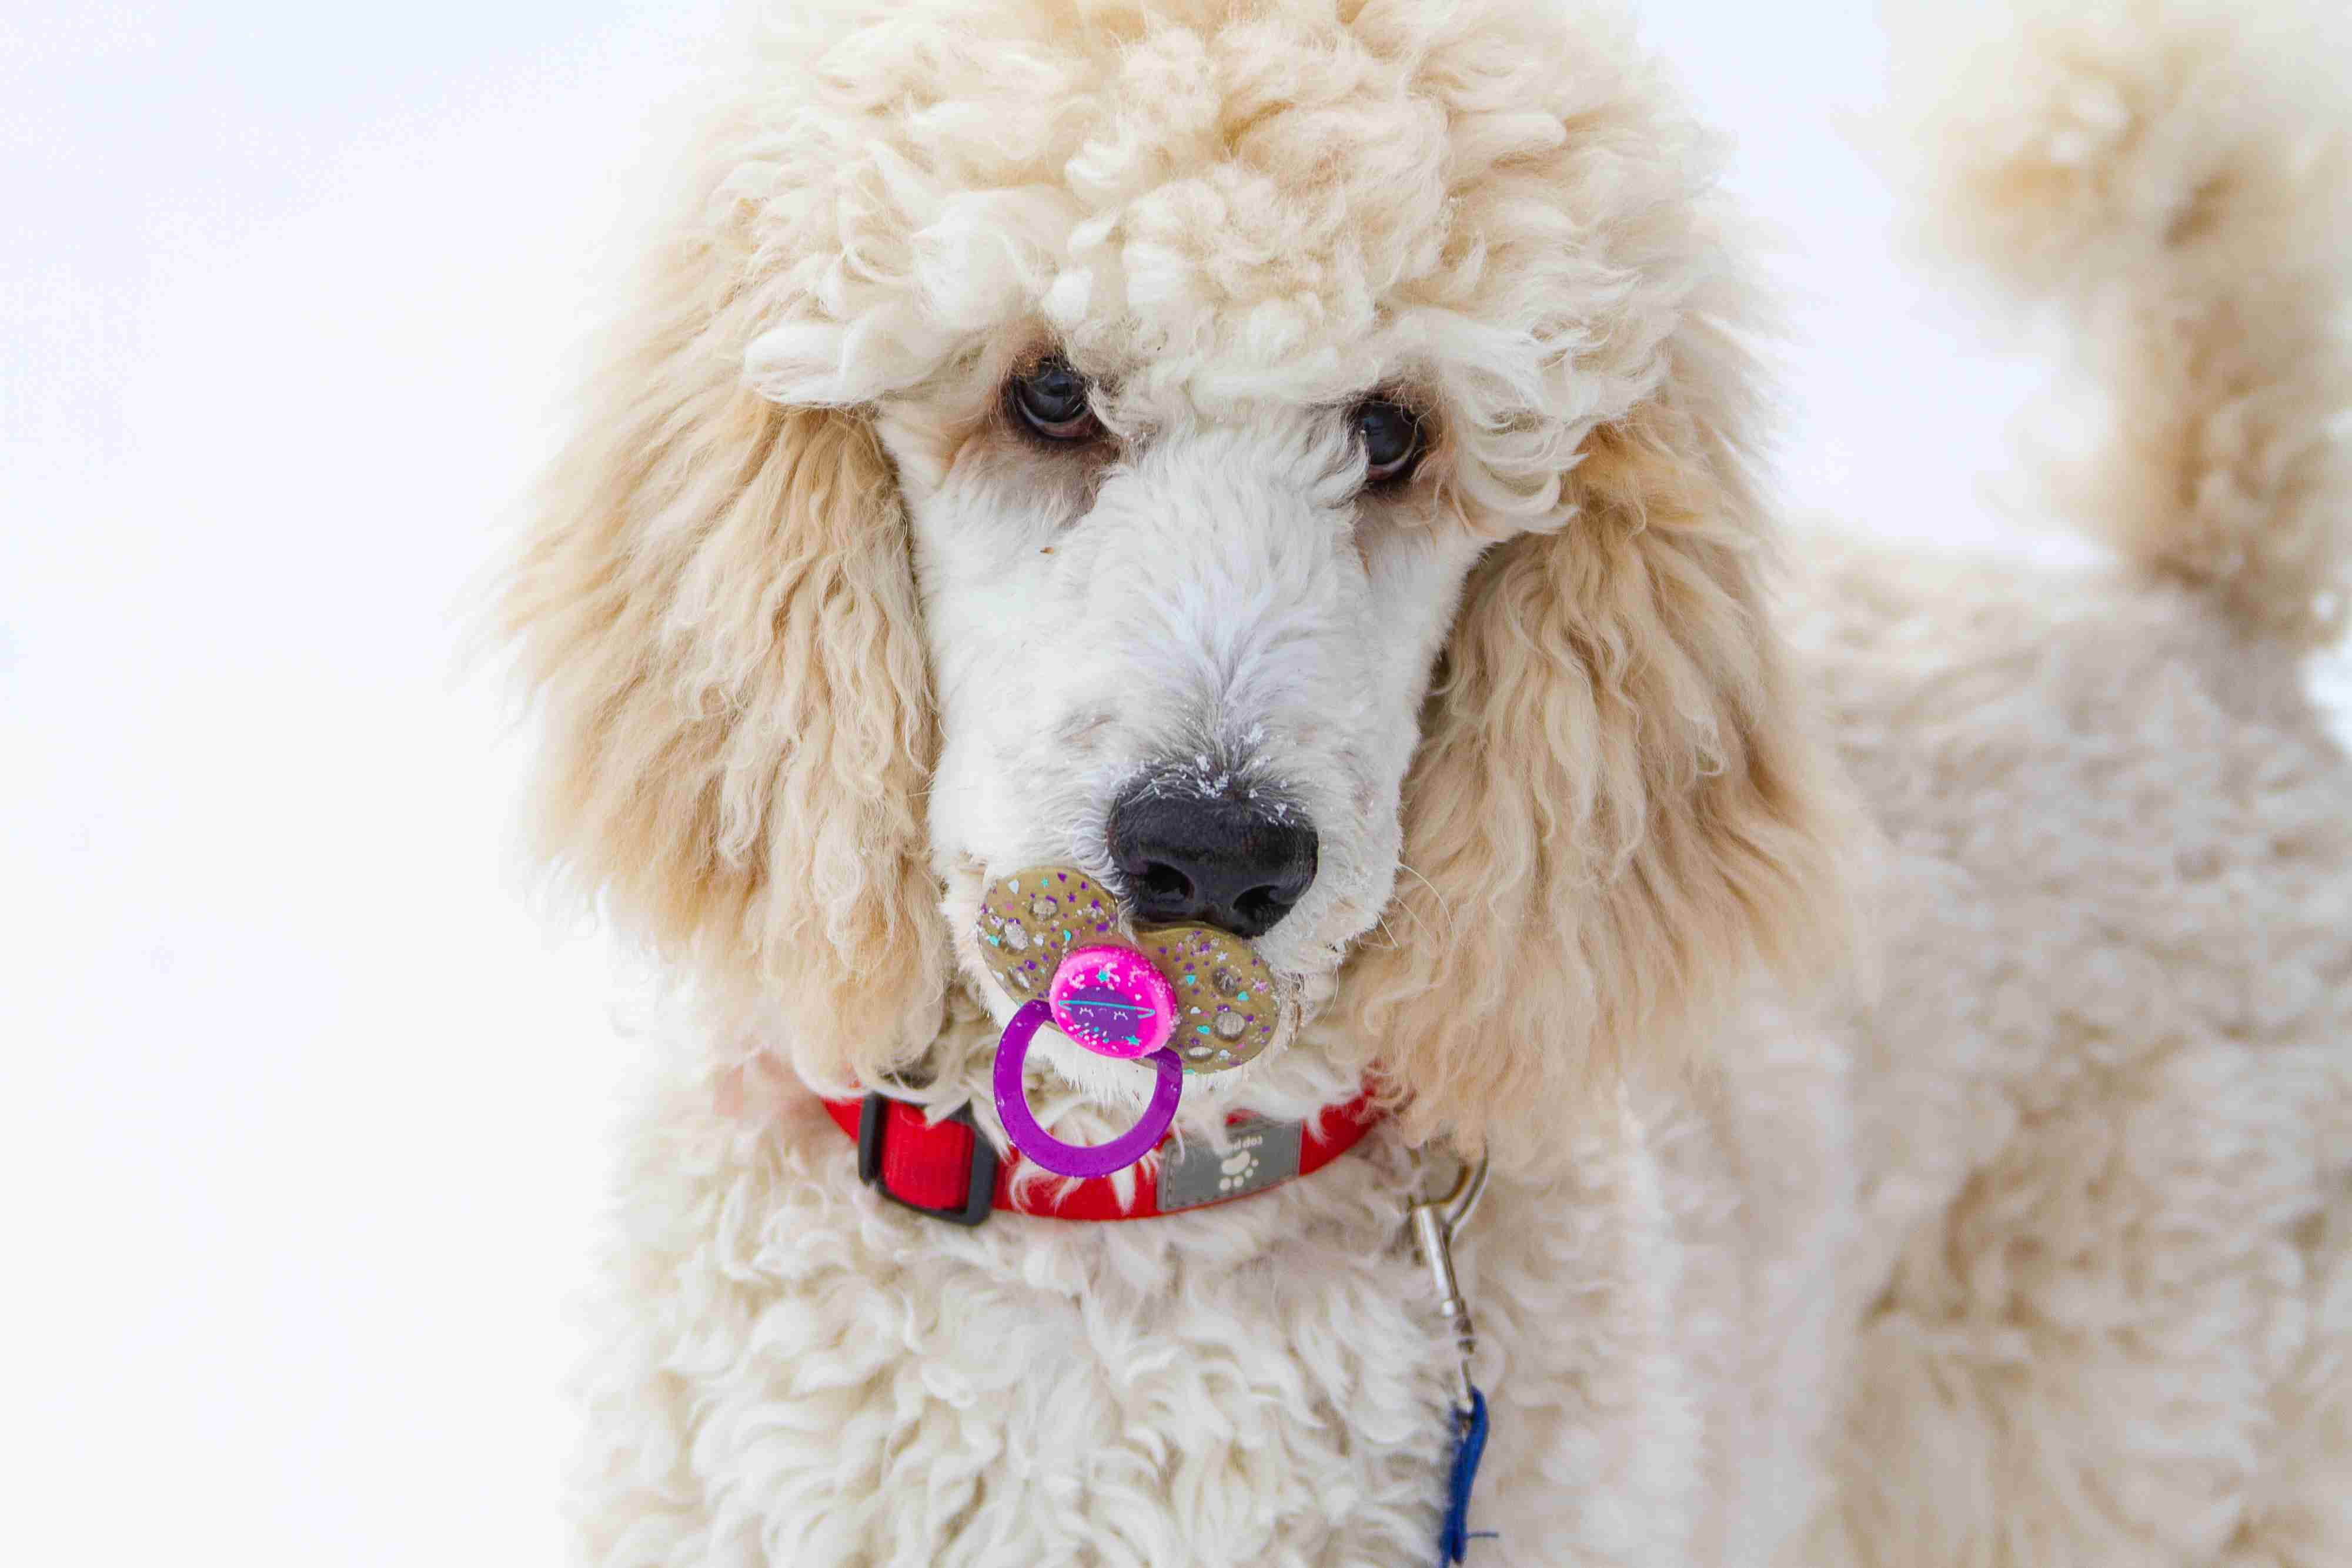 What are the treatment options for Poodles with arthritis?